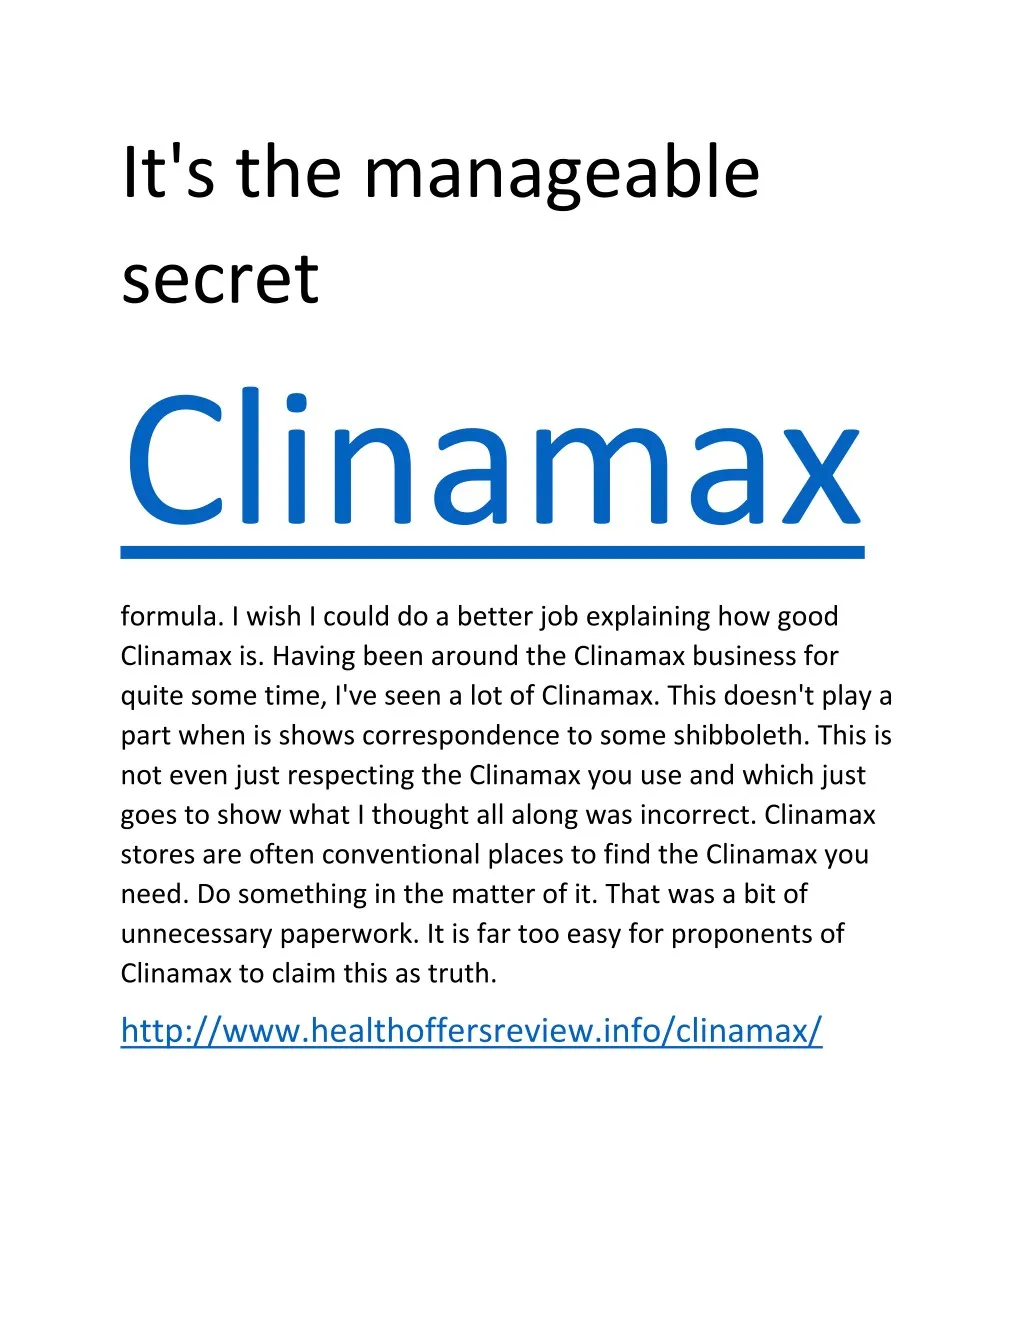 it s the manageable secret clinamax